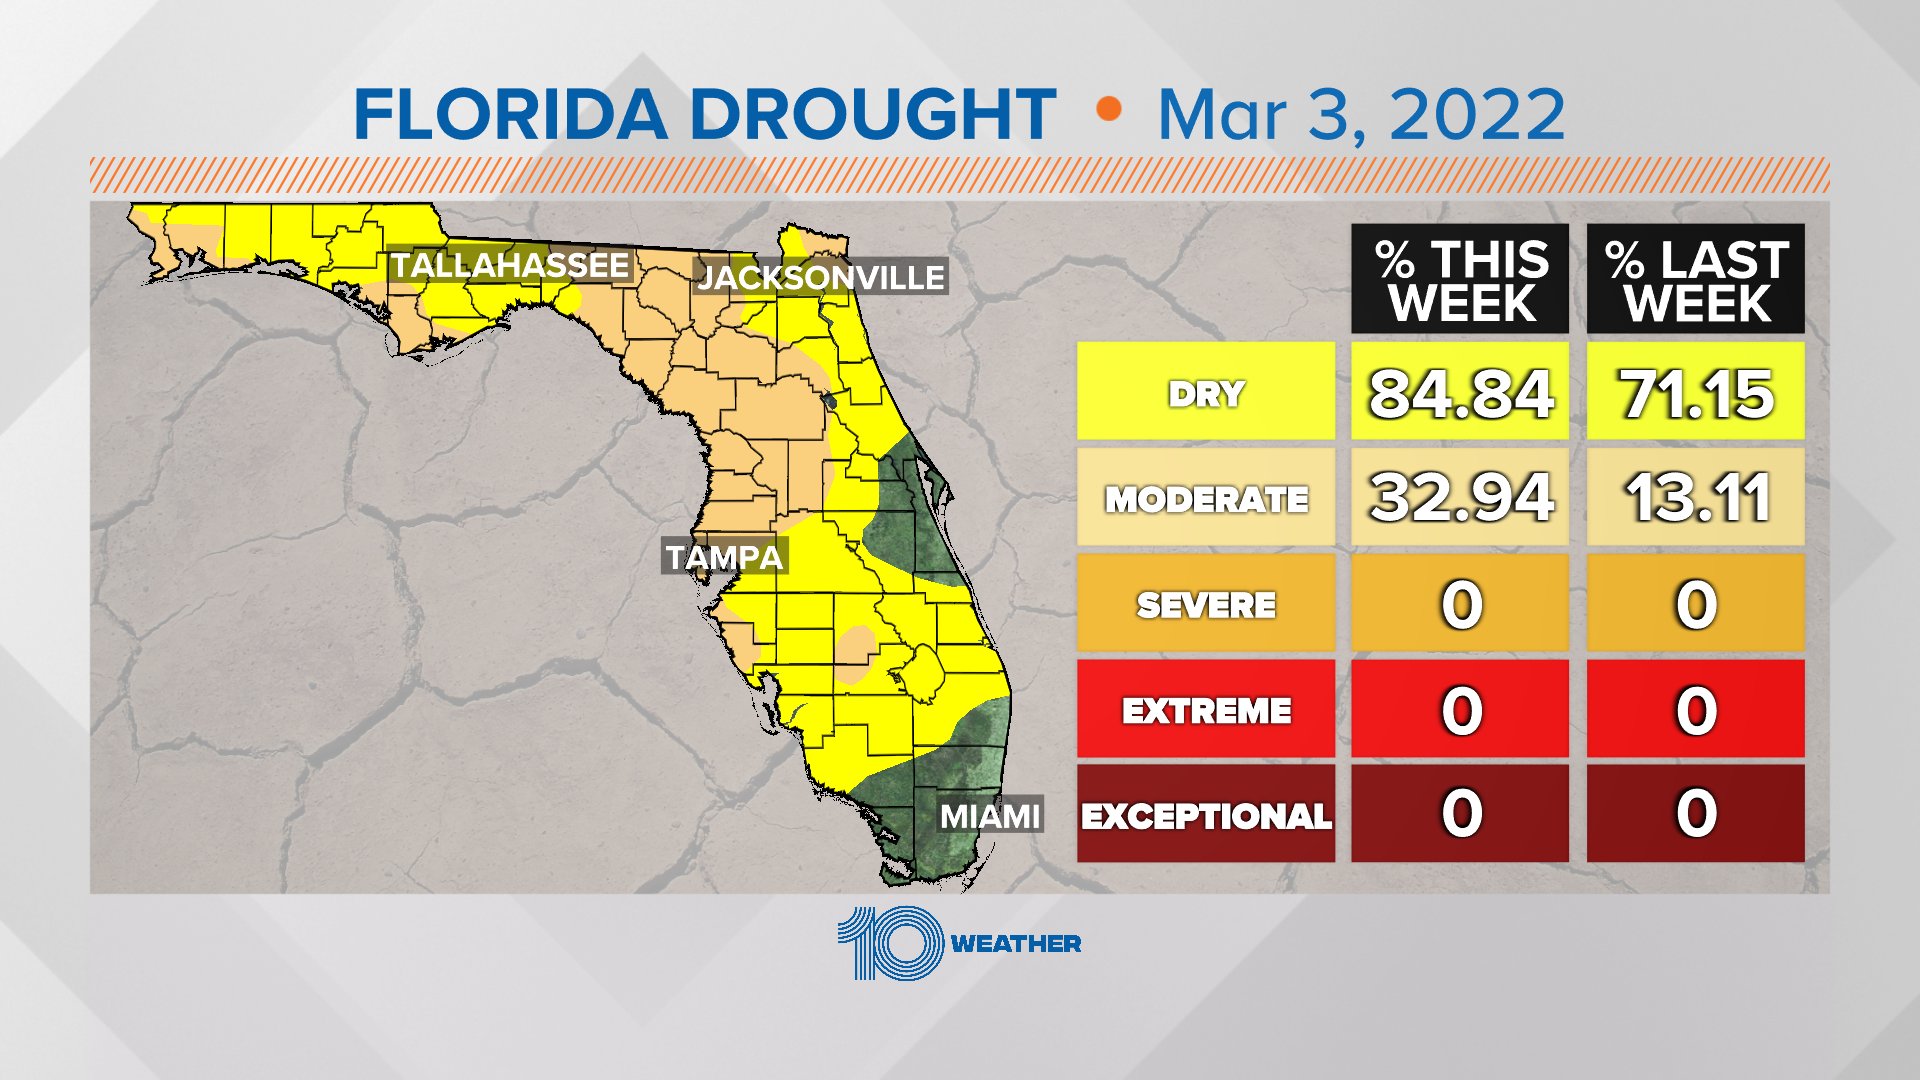 Grant Gilmore WTSP on Twitter "DROUGHT UPDATE Moderate Drought